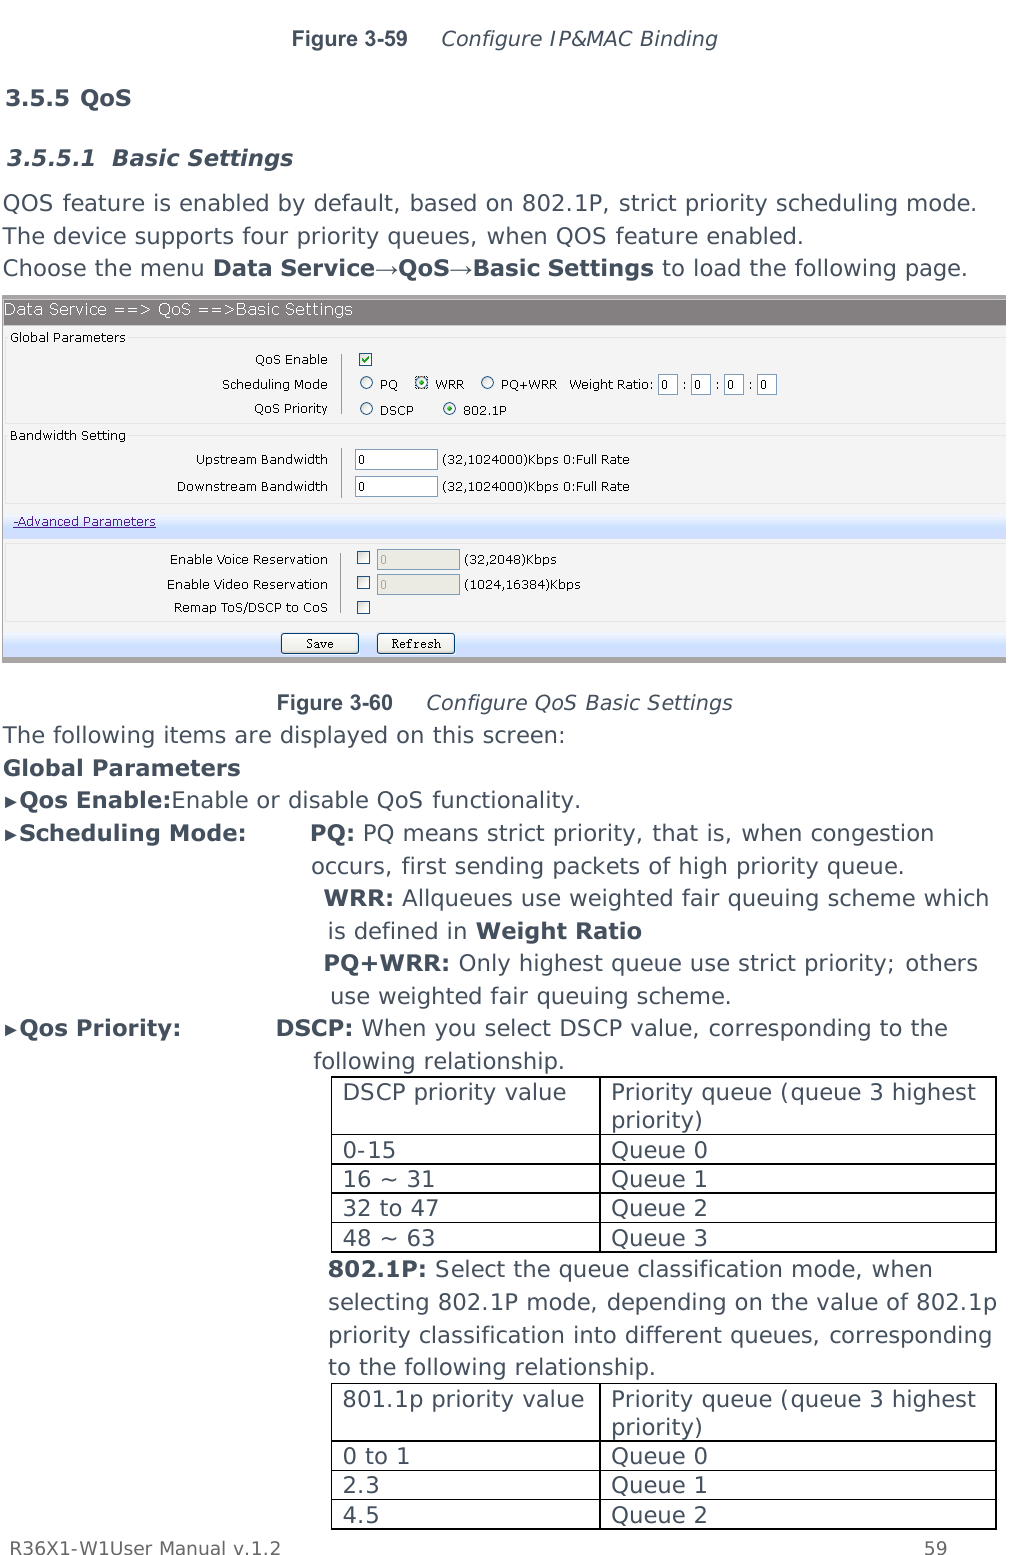           R36X1-W1User Manual v.1.2    59  Figure 3-59  Configure IP&amp;MAC Binding 3.5.5 QoS 3.5.5.1 Basic Settings QOS feature is enabled by default, based on 802.1P, strict priority scheduling mode. The device supports four priority queues, when QOS feature enabled. Choose the menu Data Service→QoS→Basic Settings to load the following page.  Figure 3-60  Configure QoS Basic Settings The following items are displayed on this screen: Global Parameters ►Qos Enable:Enable or disable QoS functionality. ►Scheduling Mode:        PQ: PQ means strict priority, that is, when congestion occurs, first sending packets of high priority queue. WRR: Allqueues use weighted fair queuing scheme which is defined in Weight Ratio PQ+WRR: Only highest queue use strict priority; others use weighted fair queuing scheme. ►Qos Priority:            DSCP: When you select DSCP value, corresponding to the following relationship. DSCP priority value  Priority queue (queue 3 highest priority) 0-15 Queue 0 16 ~ 31  Queue 1 32 to 47  Queue 2 48 ~ 63  Queue 3 802.1P: Select the queue classification mode, when selecting 802.1P mode, depending on the value of 802.1p priority classification into different queues, corresponding to the following relationship. 801.1p priority value Priority queue (queue 3 highest priority) 0 to 1  Queue 0 2.3   Queue 1 4.5 Queue 2 